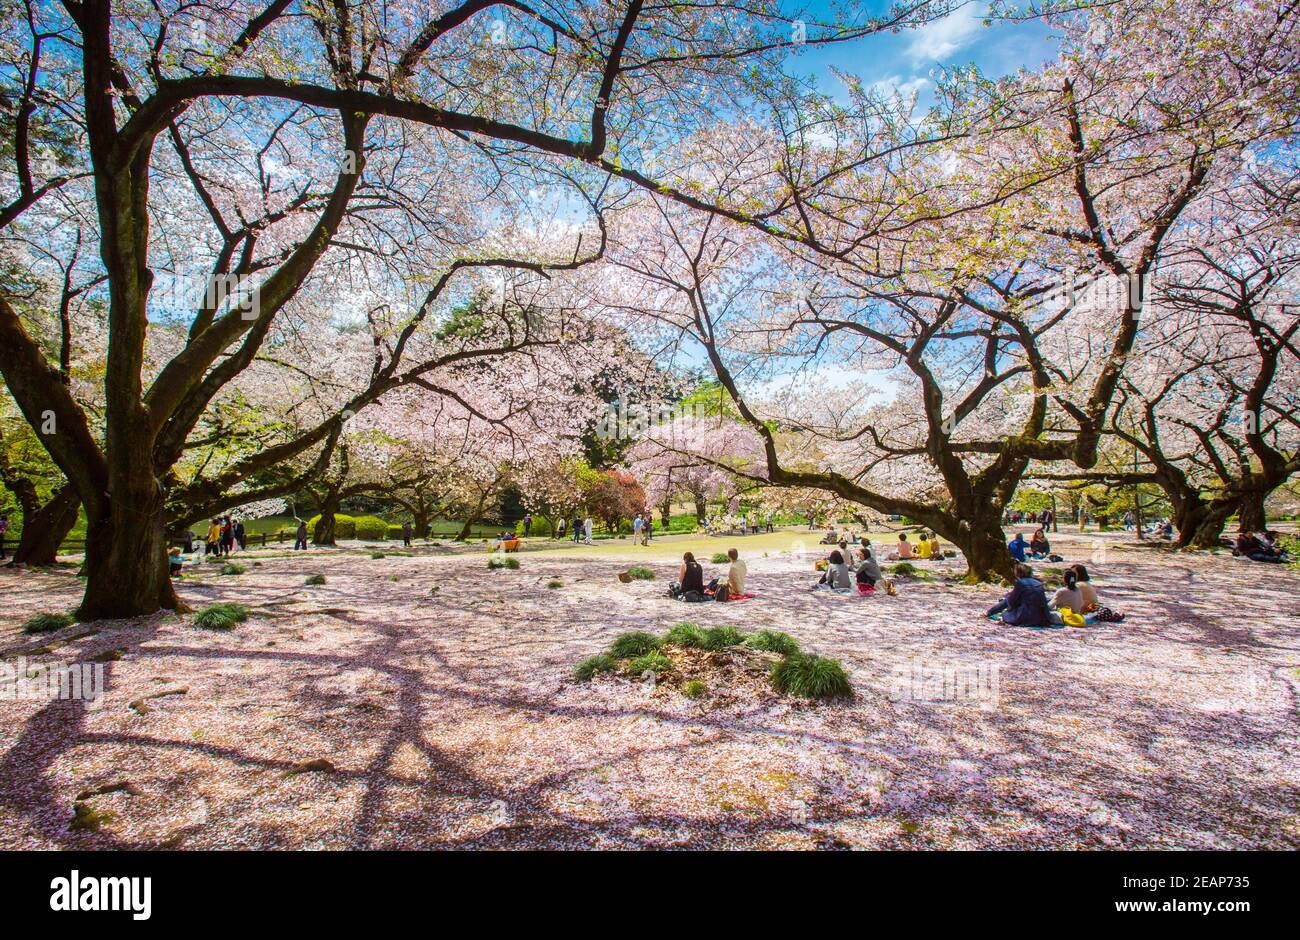 Tokyo, Japan Japanese people have party, picnic under the sakura trees in full bloom in spring at Ueno park, Hanami cherry blossom party stunning Stock Photo